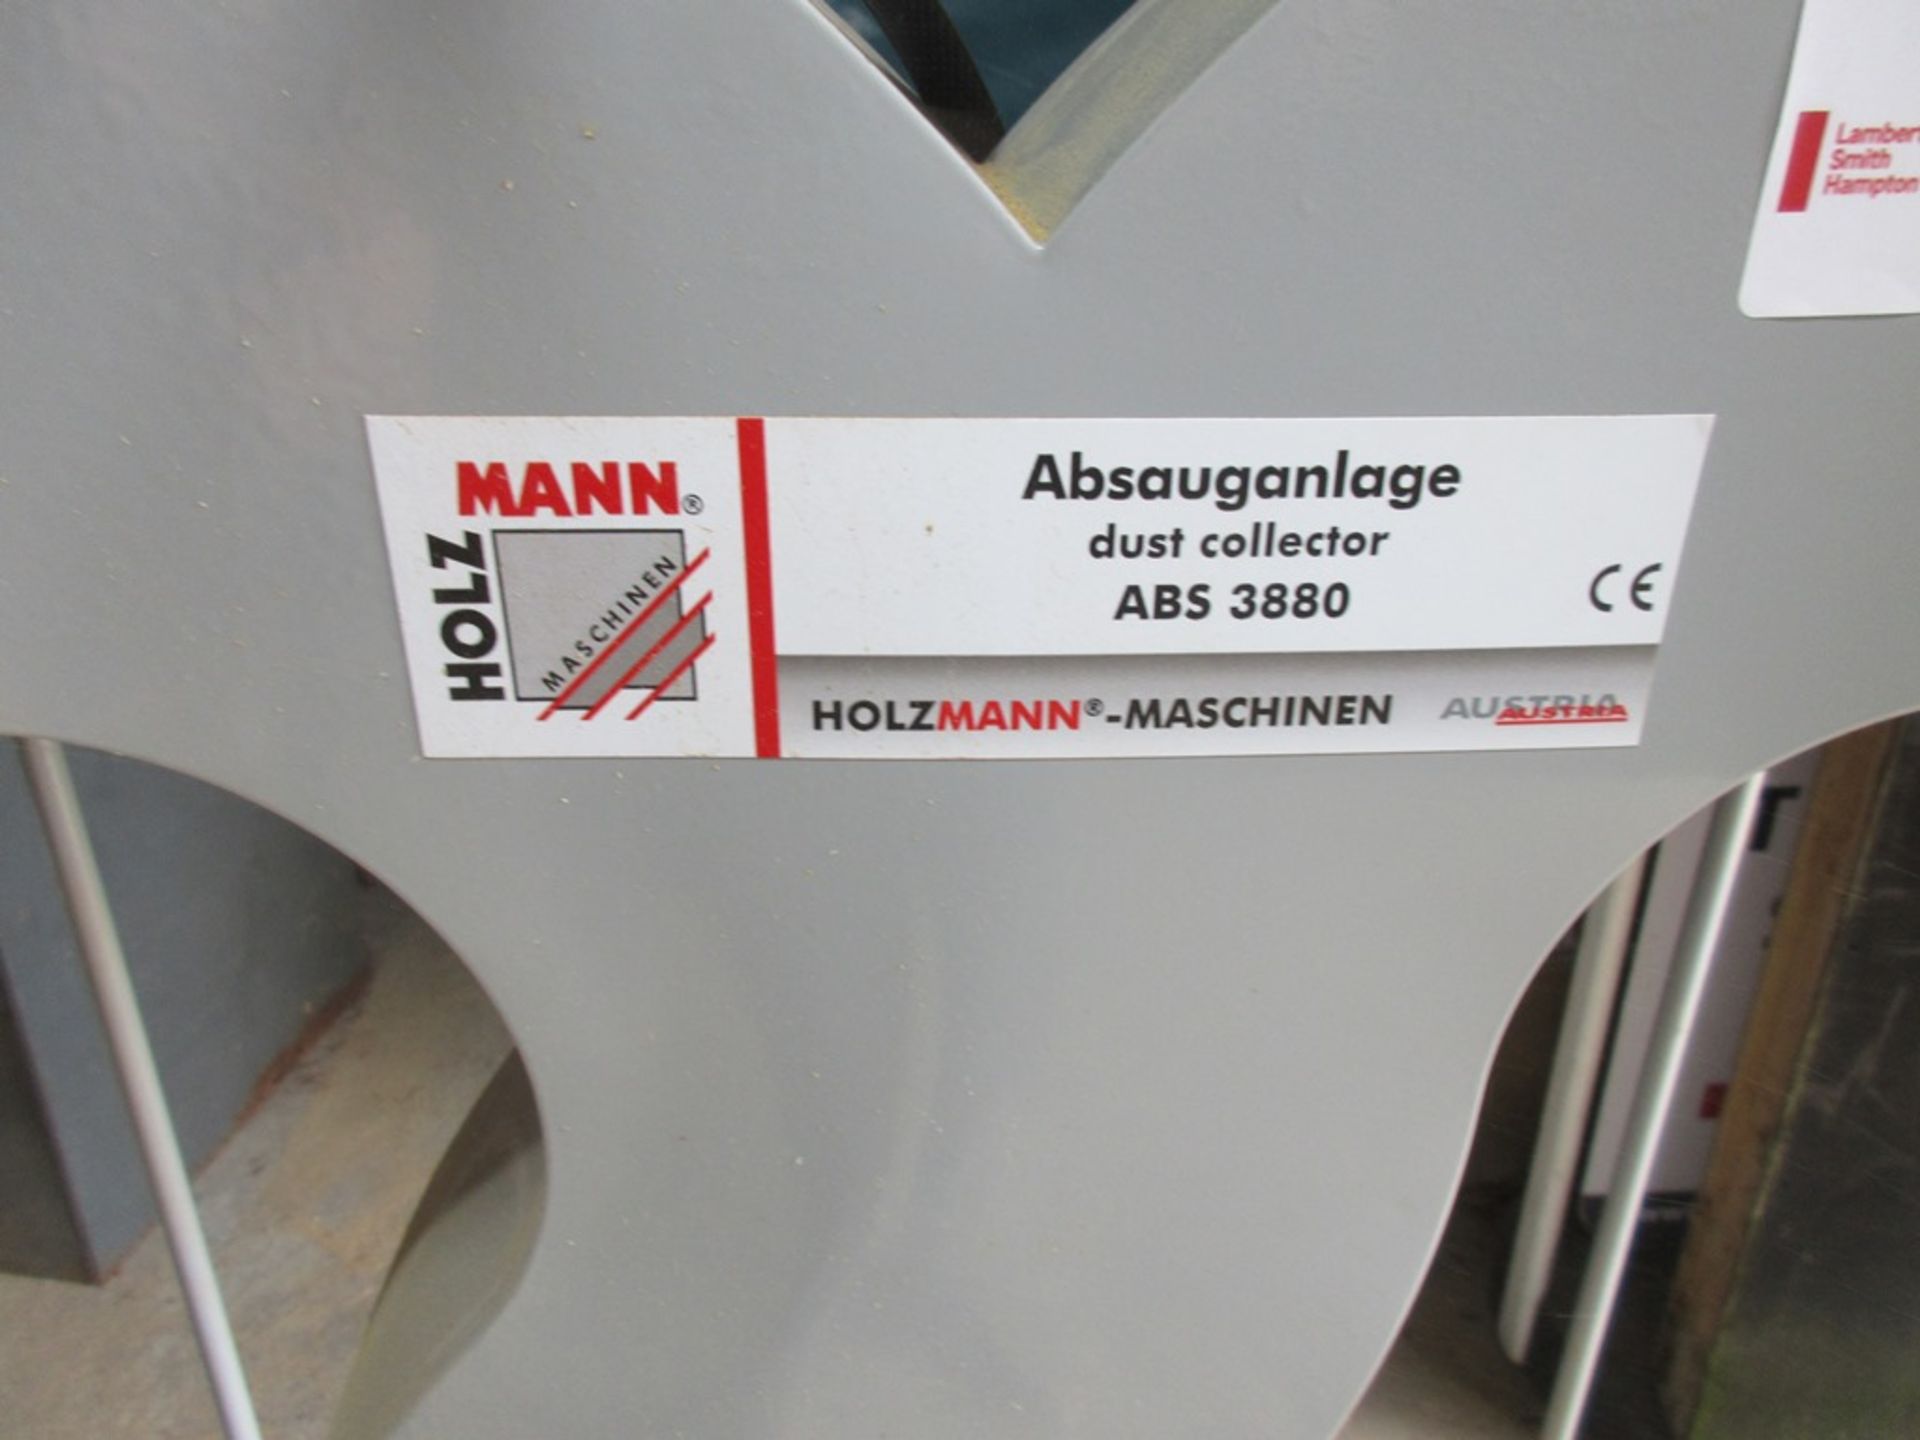 Holzmann Absauganlage ABS 38809 mobile 2-bag dust collector - Image 3 of 4